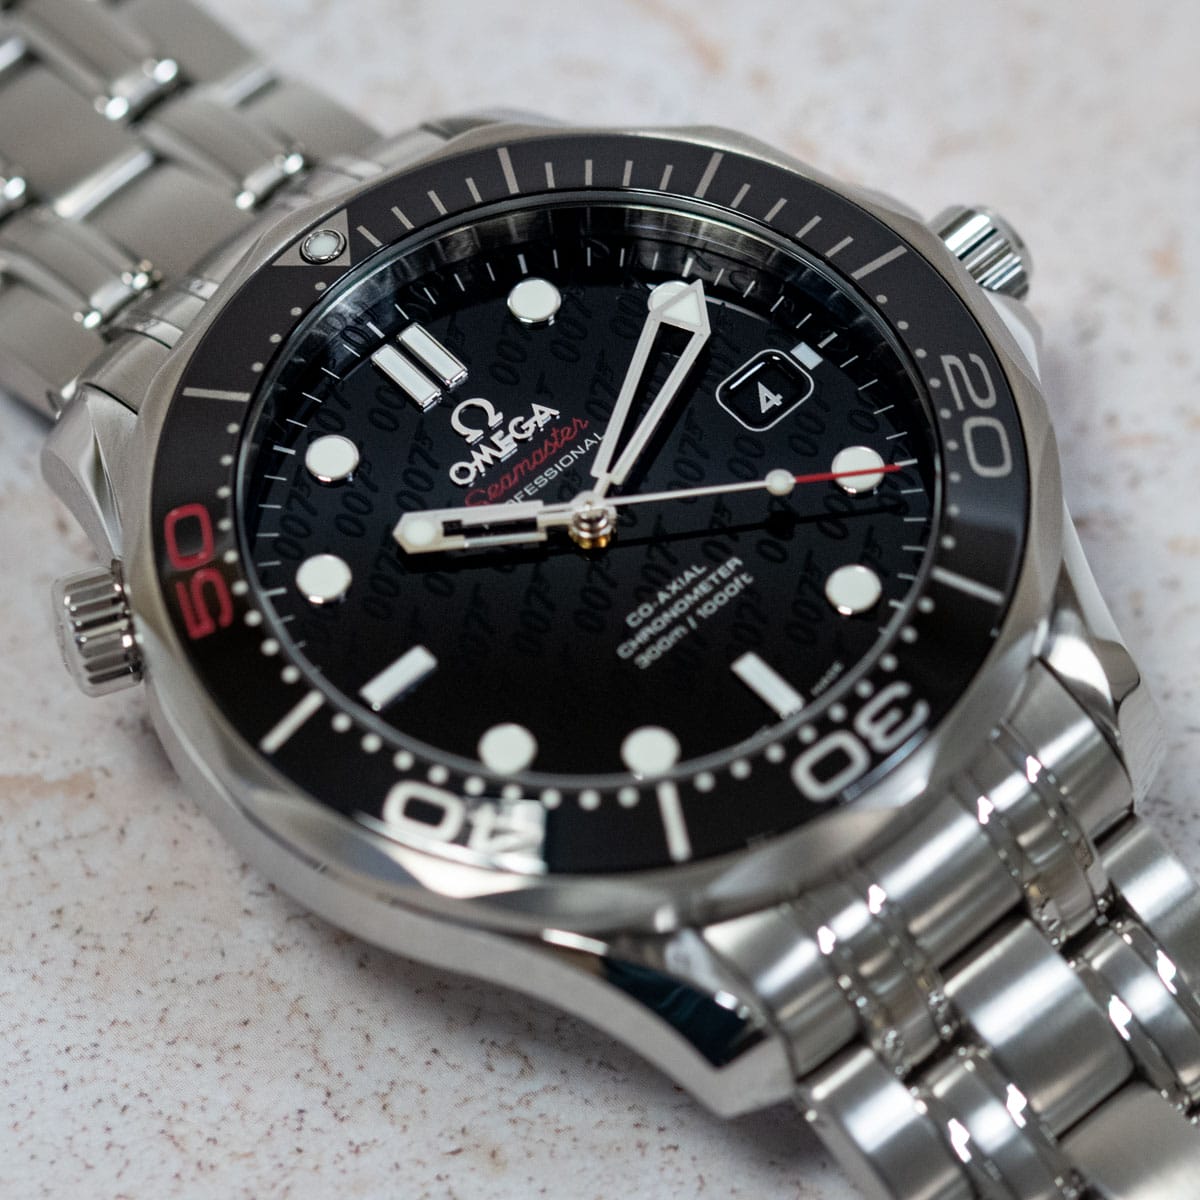 Stylied photo of  of Seamaster Professional James Bond 50th Anniversary Limited Edition